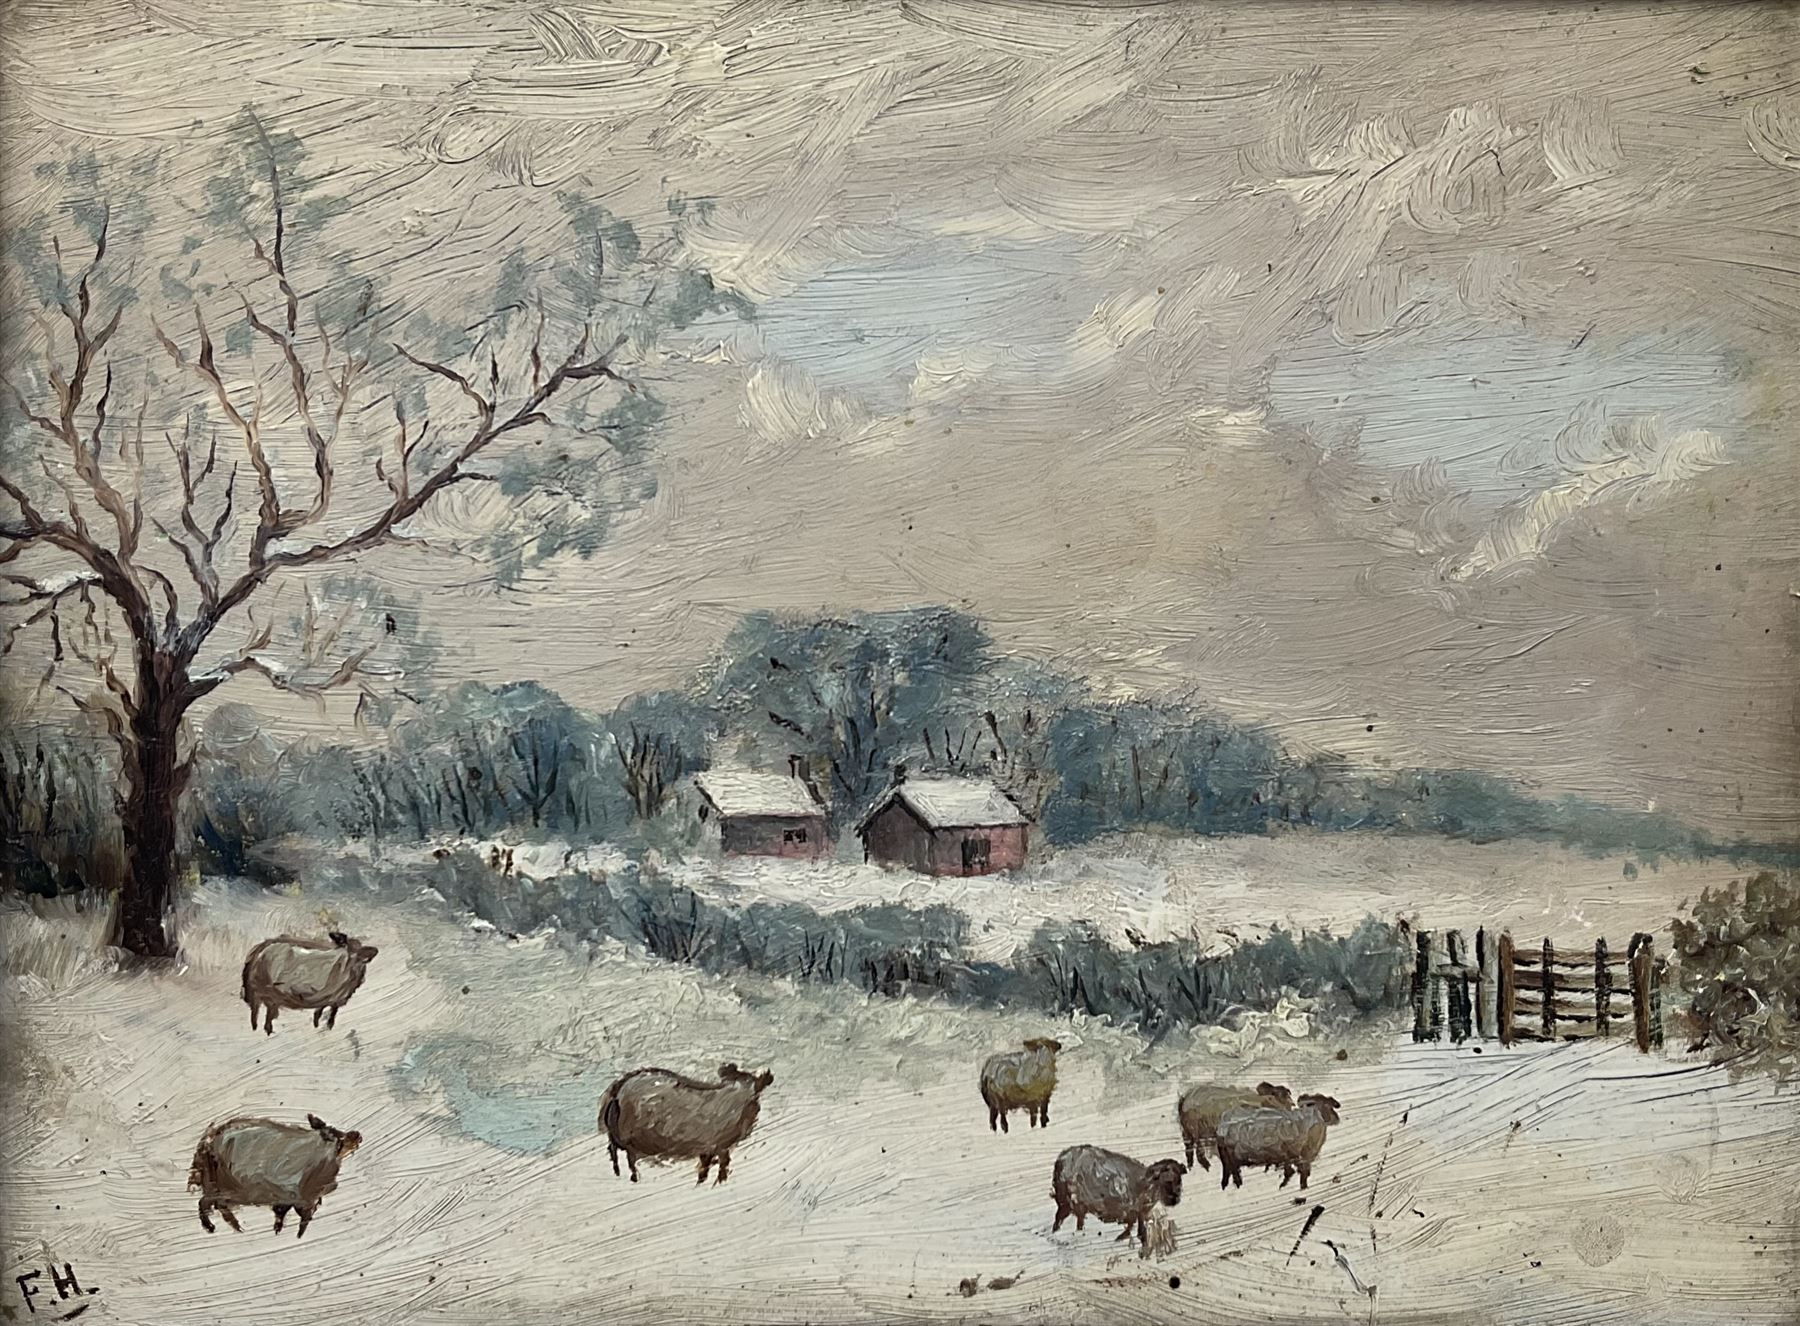 English Naive School (19th/20th century): Sheep in a Snowy Landscape